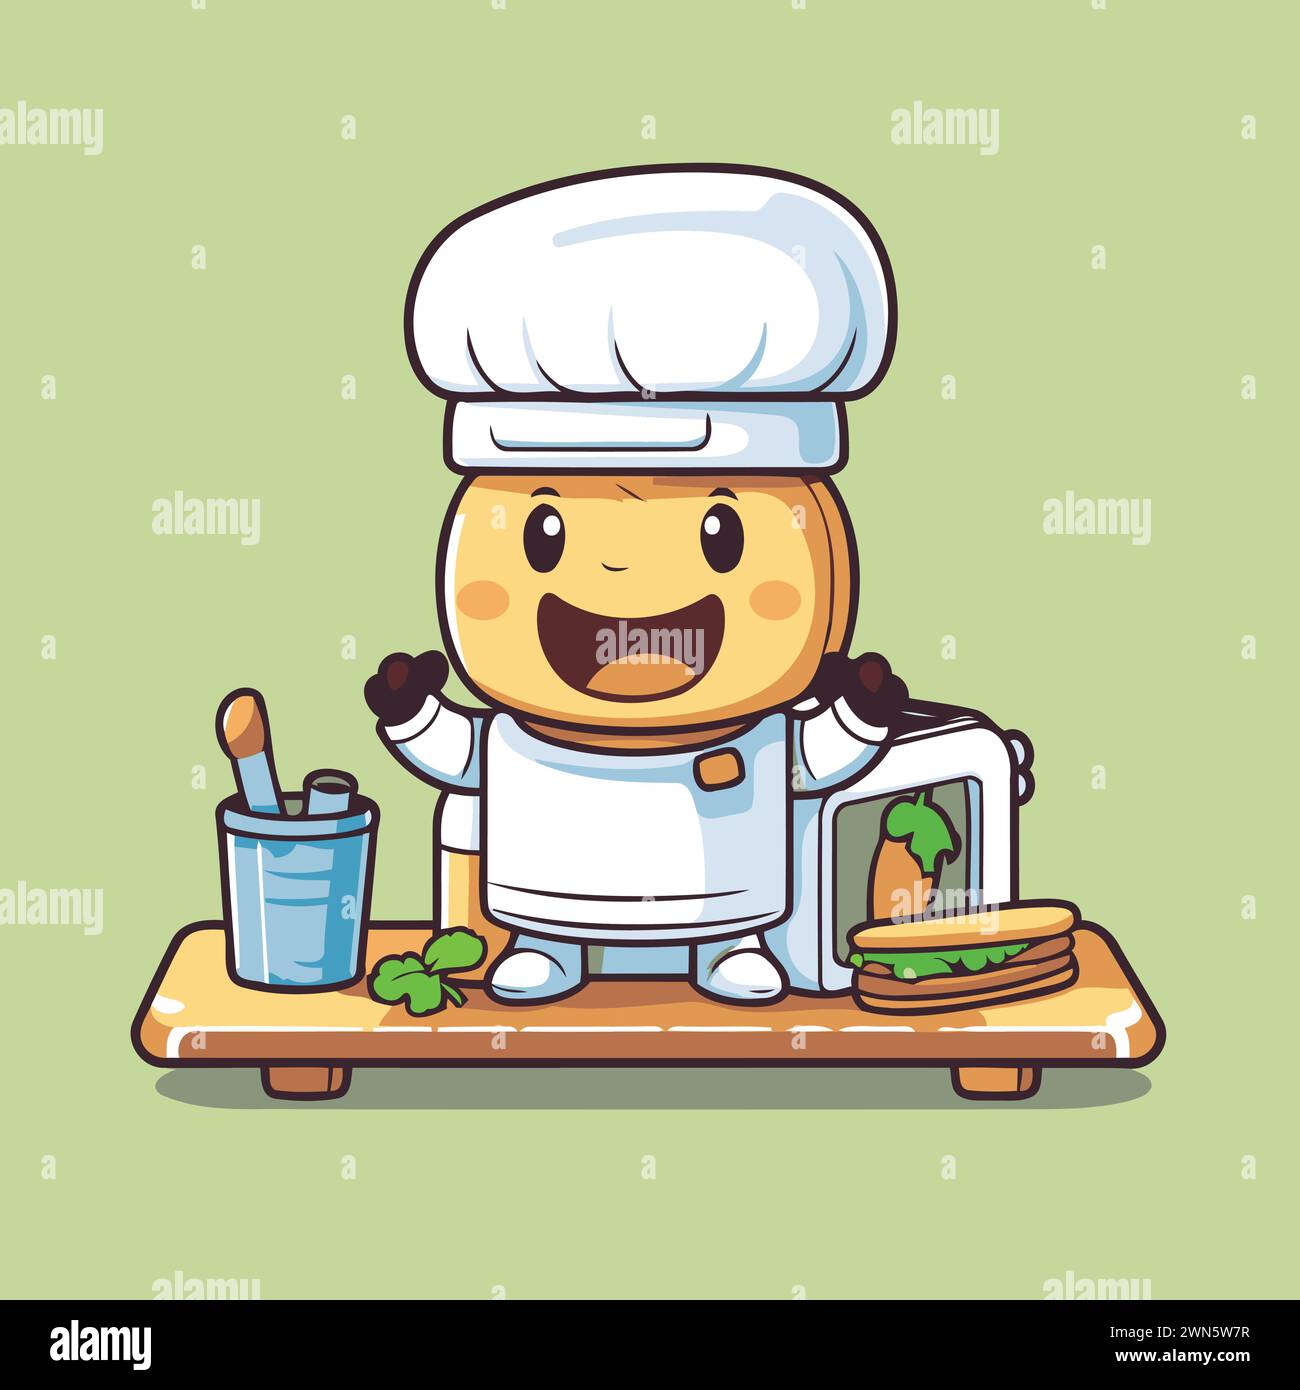 Chef cookie character cartoon vector illustration. Cute chef cookie mascot. Stock Vector